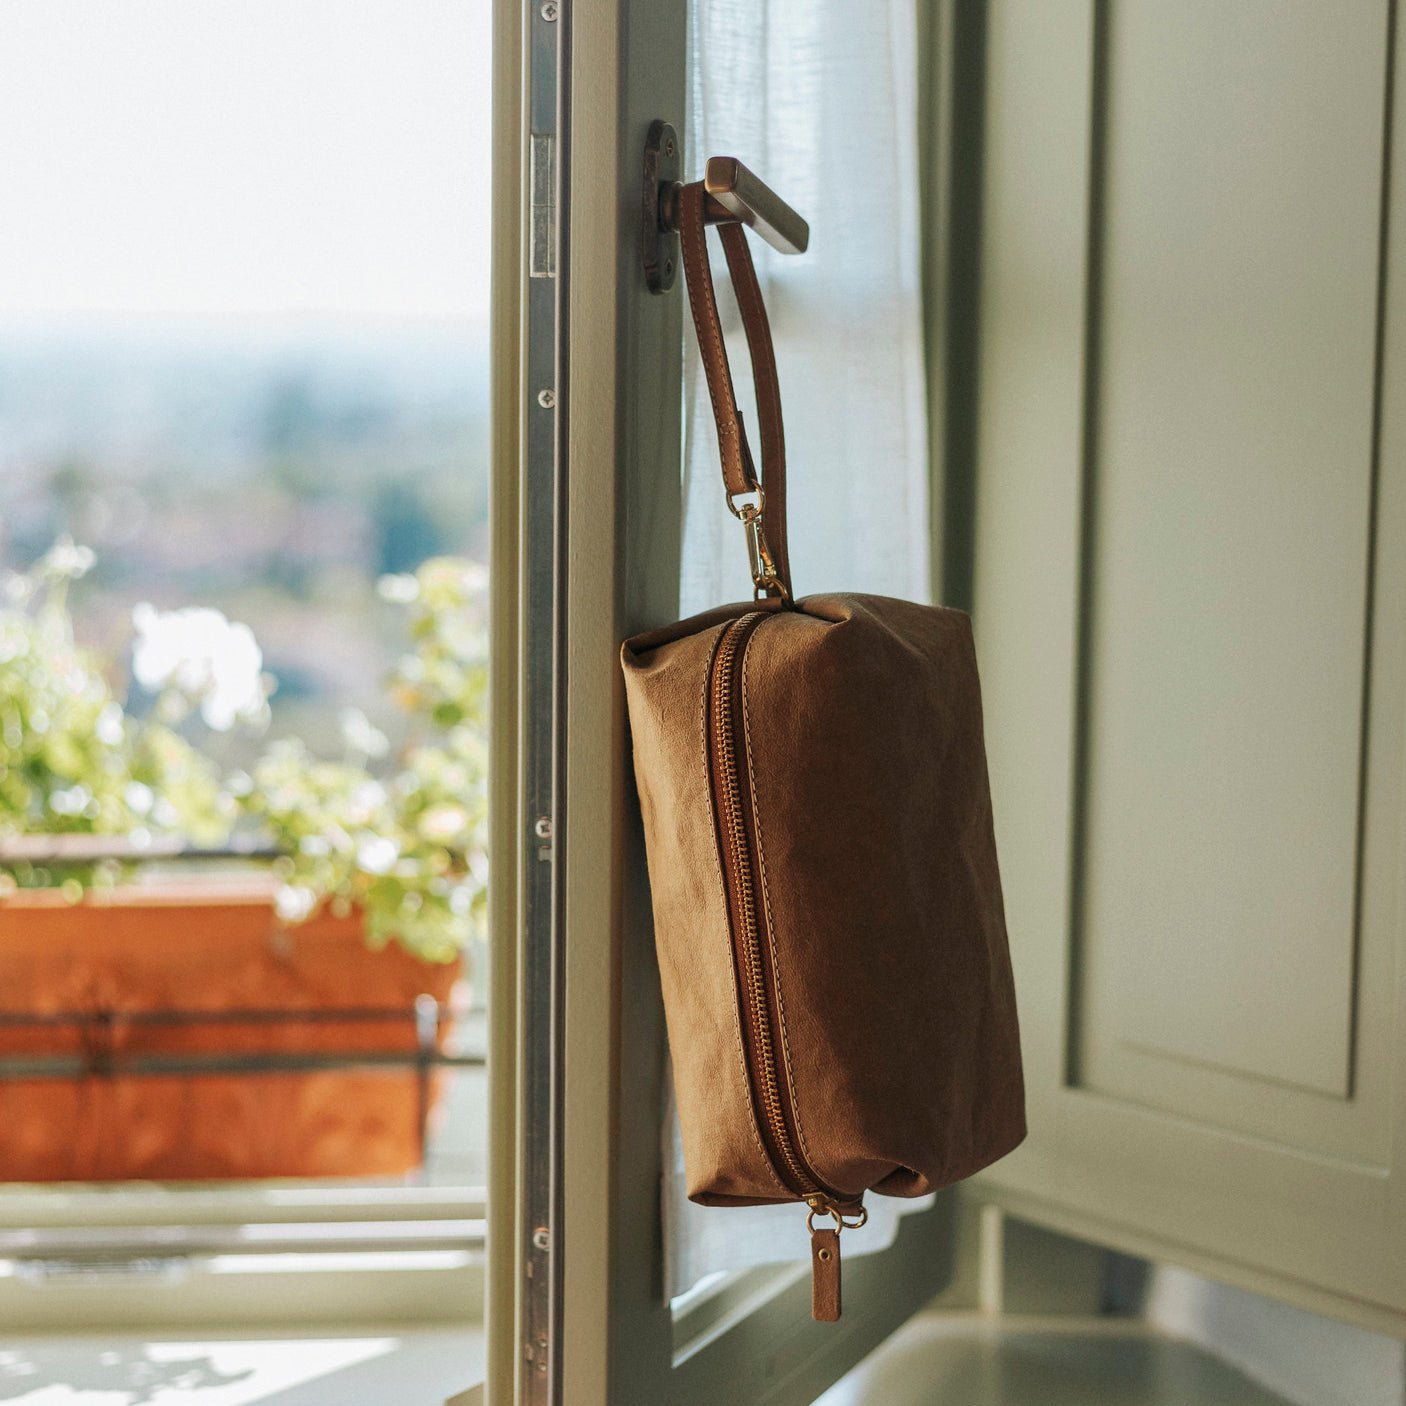 A washable paper pouch, tan in colour, is shown hanging from a window by its handle.